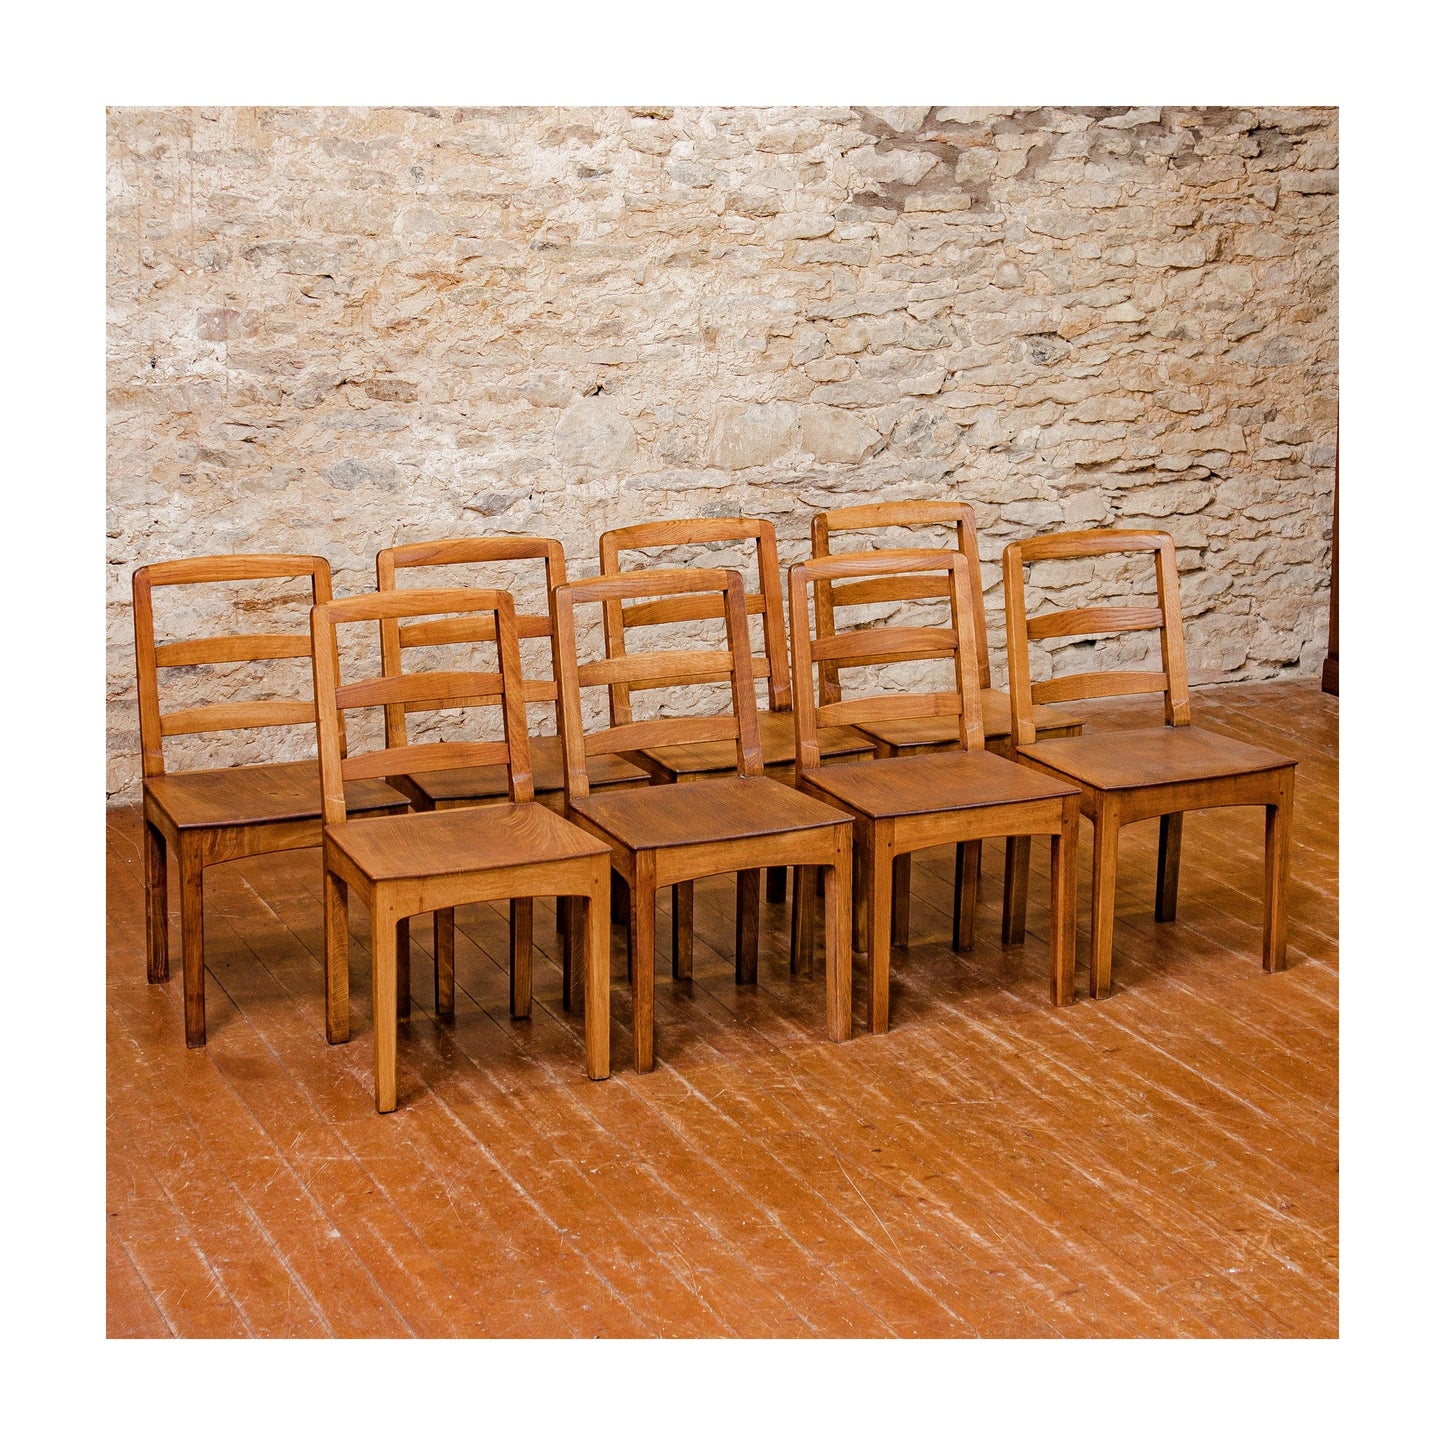 Set of 8 Peter Hall Arts & Crafts Lakes School English Oak Arched Rail Chairs.